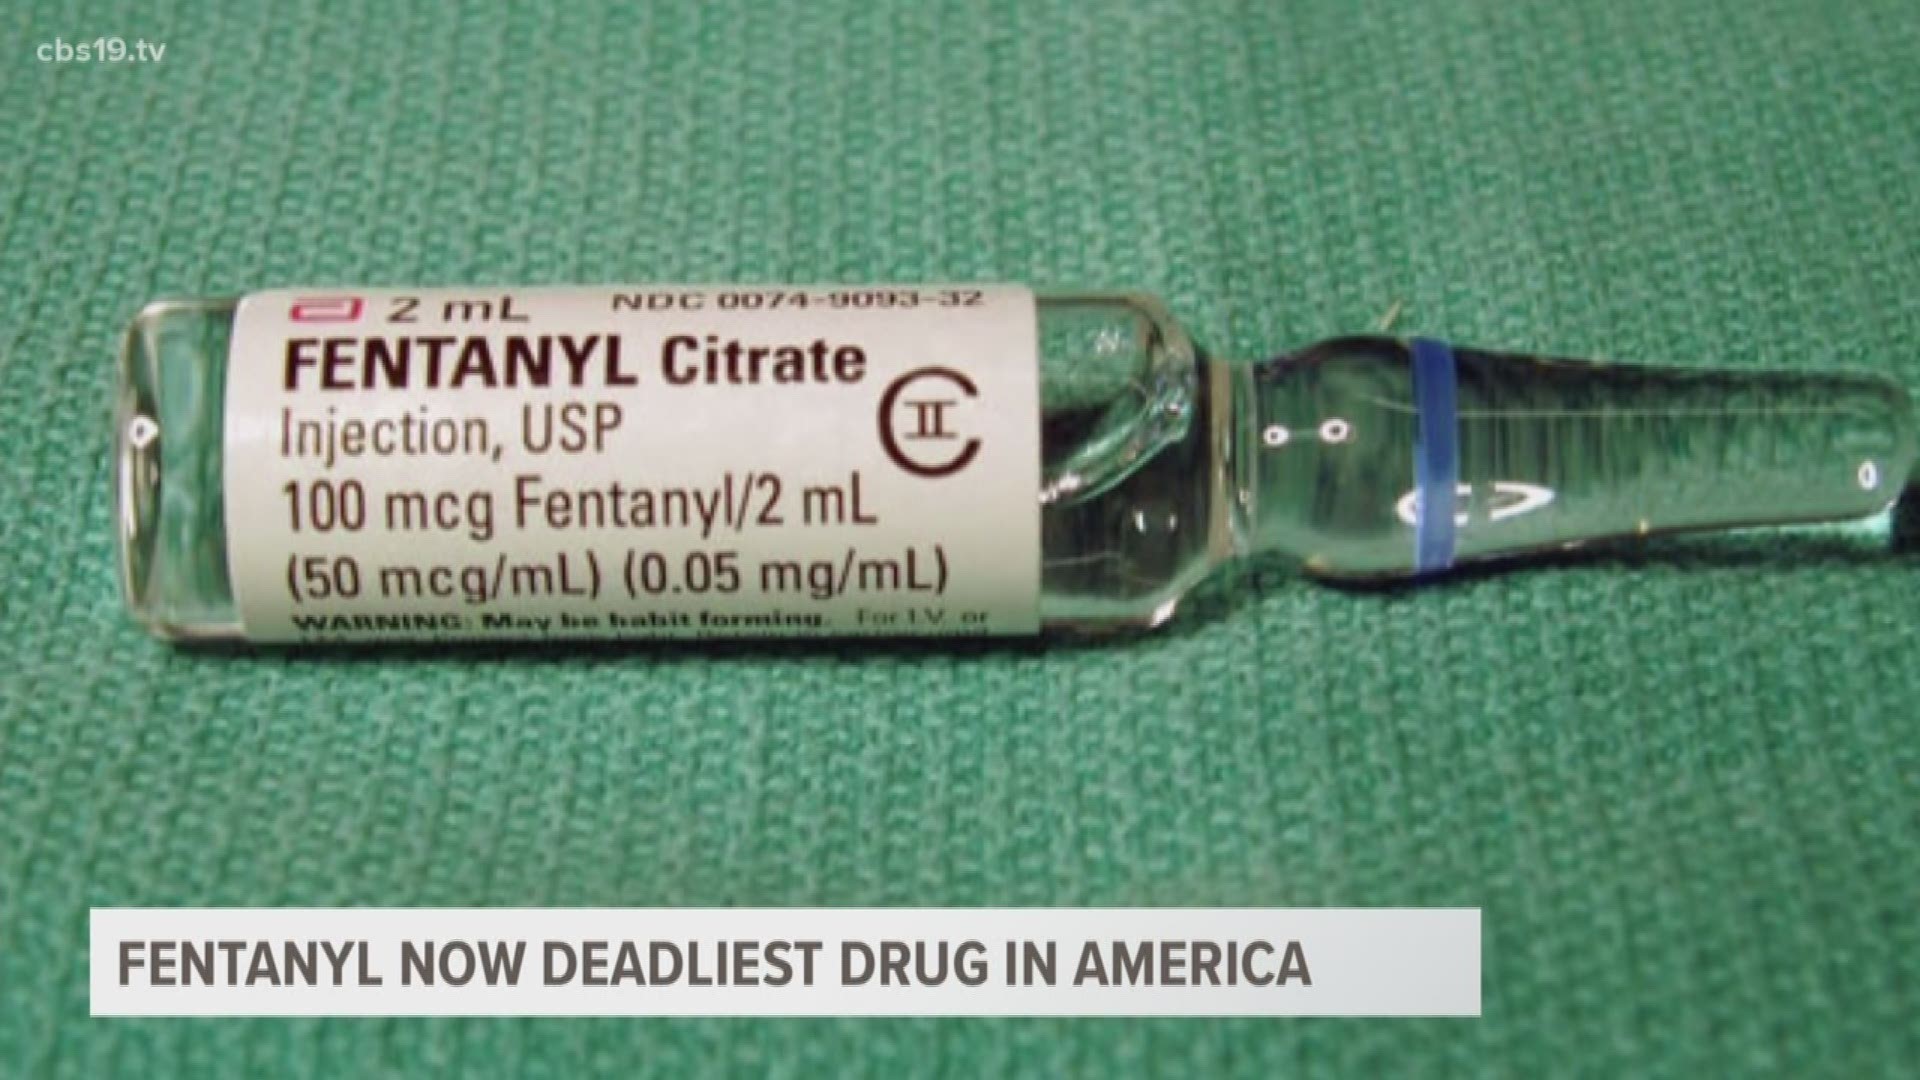 Fentalyn is responsible for 18,000 overdose deaths in 2016.